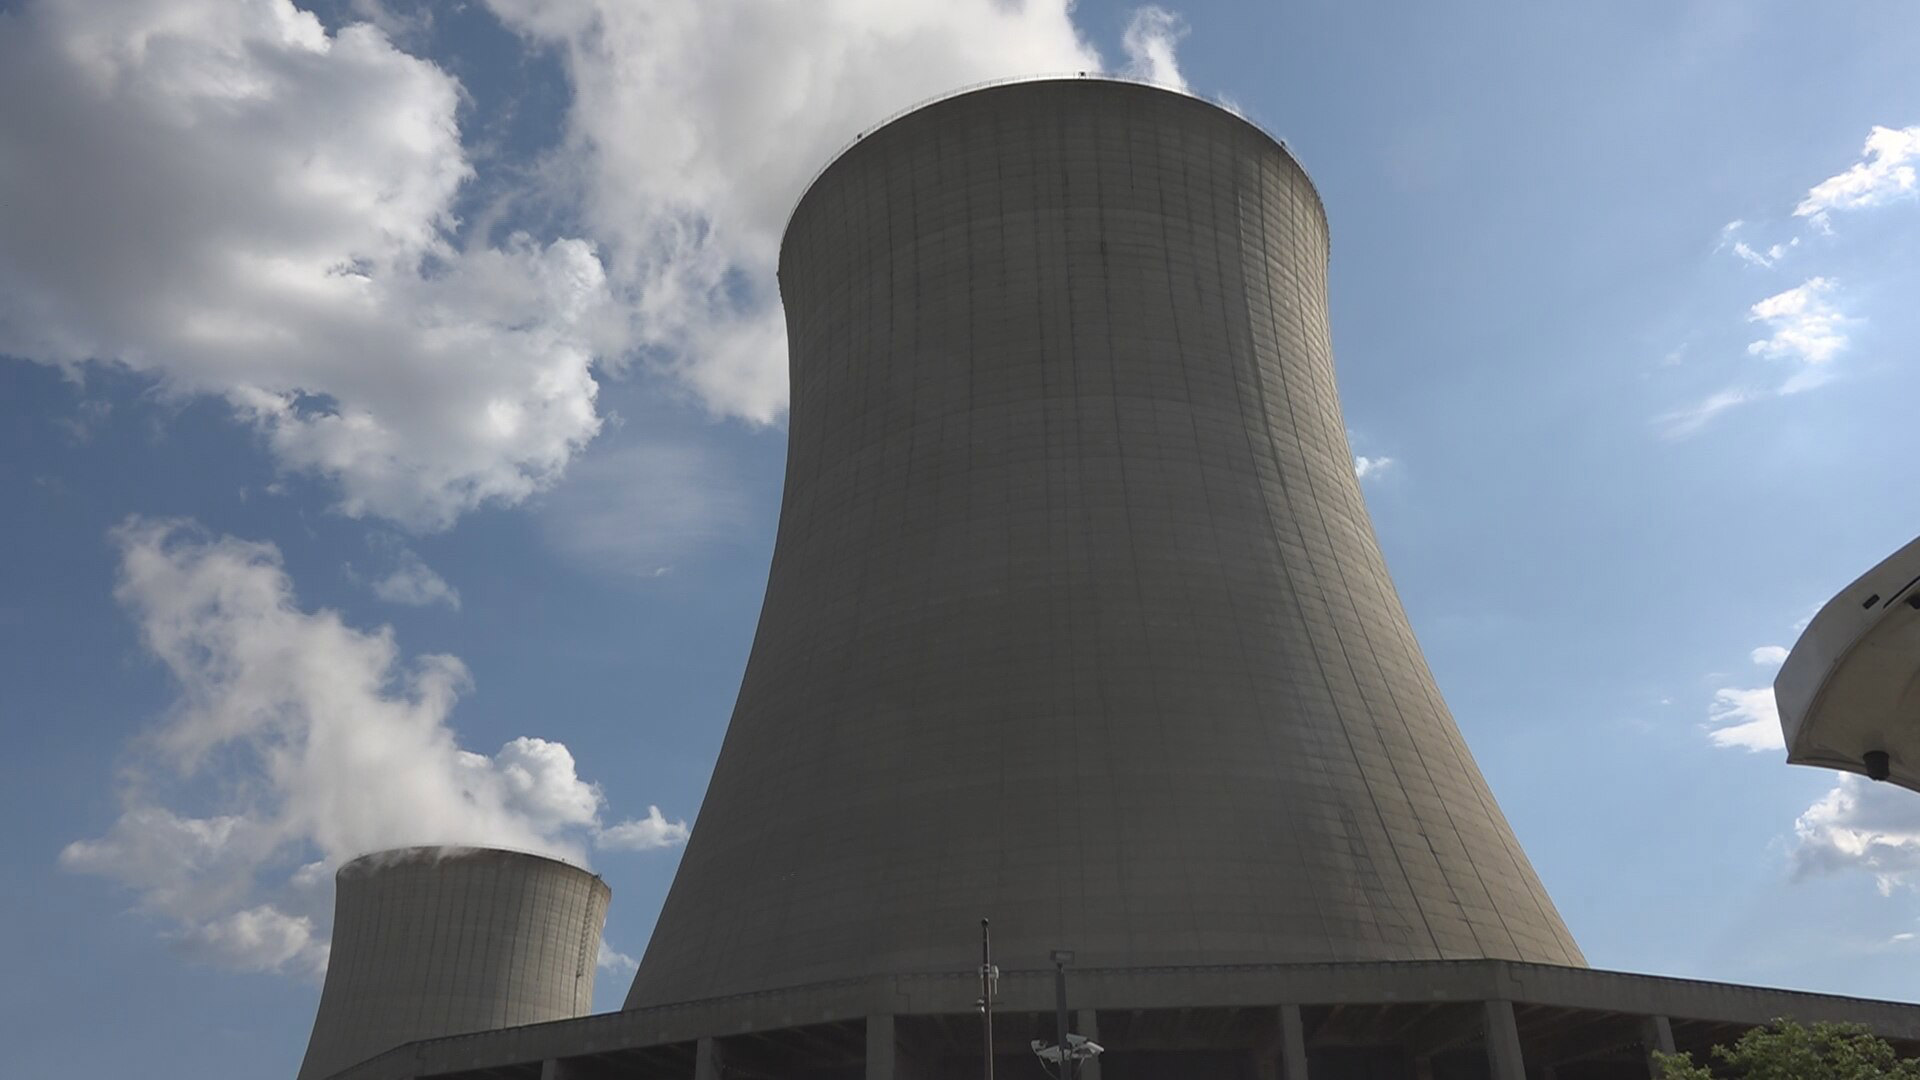 Nuclear power plants on agenda as Illinois veto session begins Tuesday